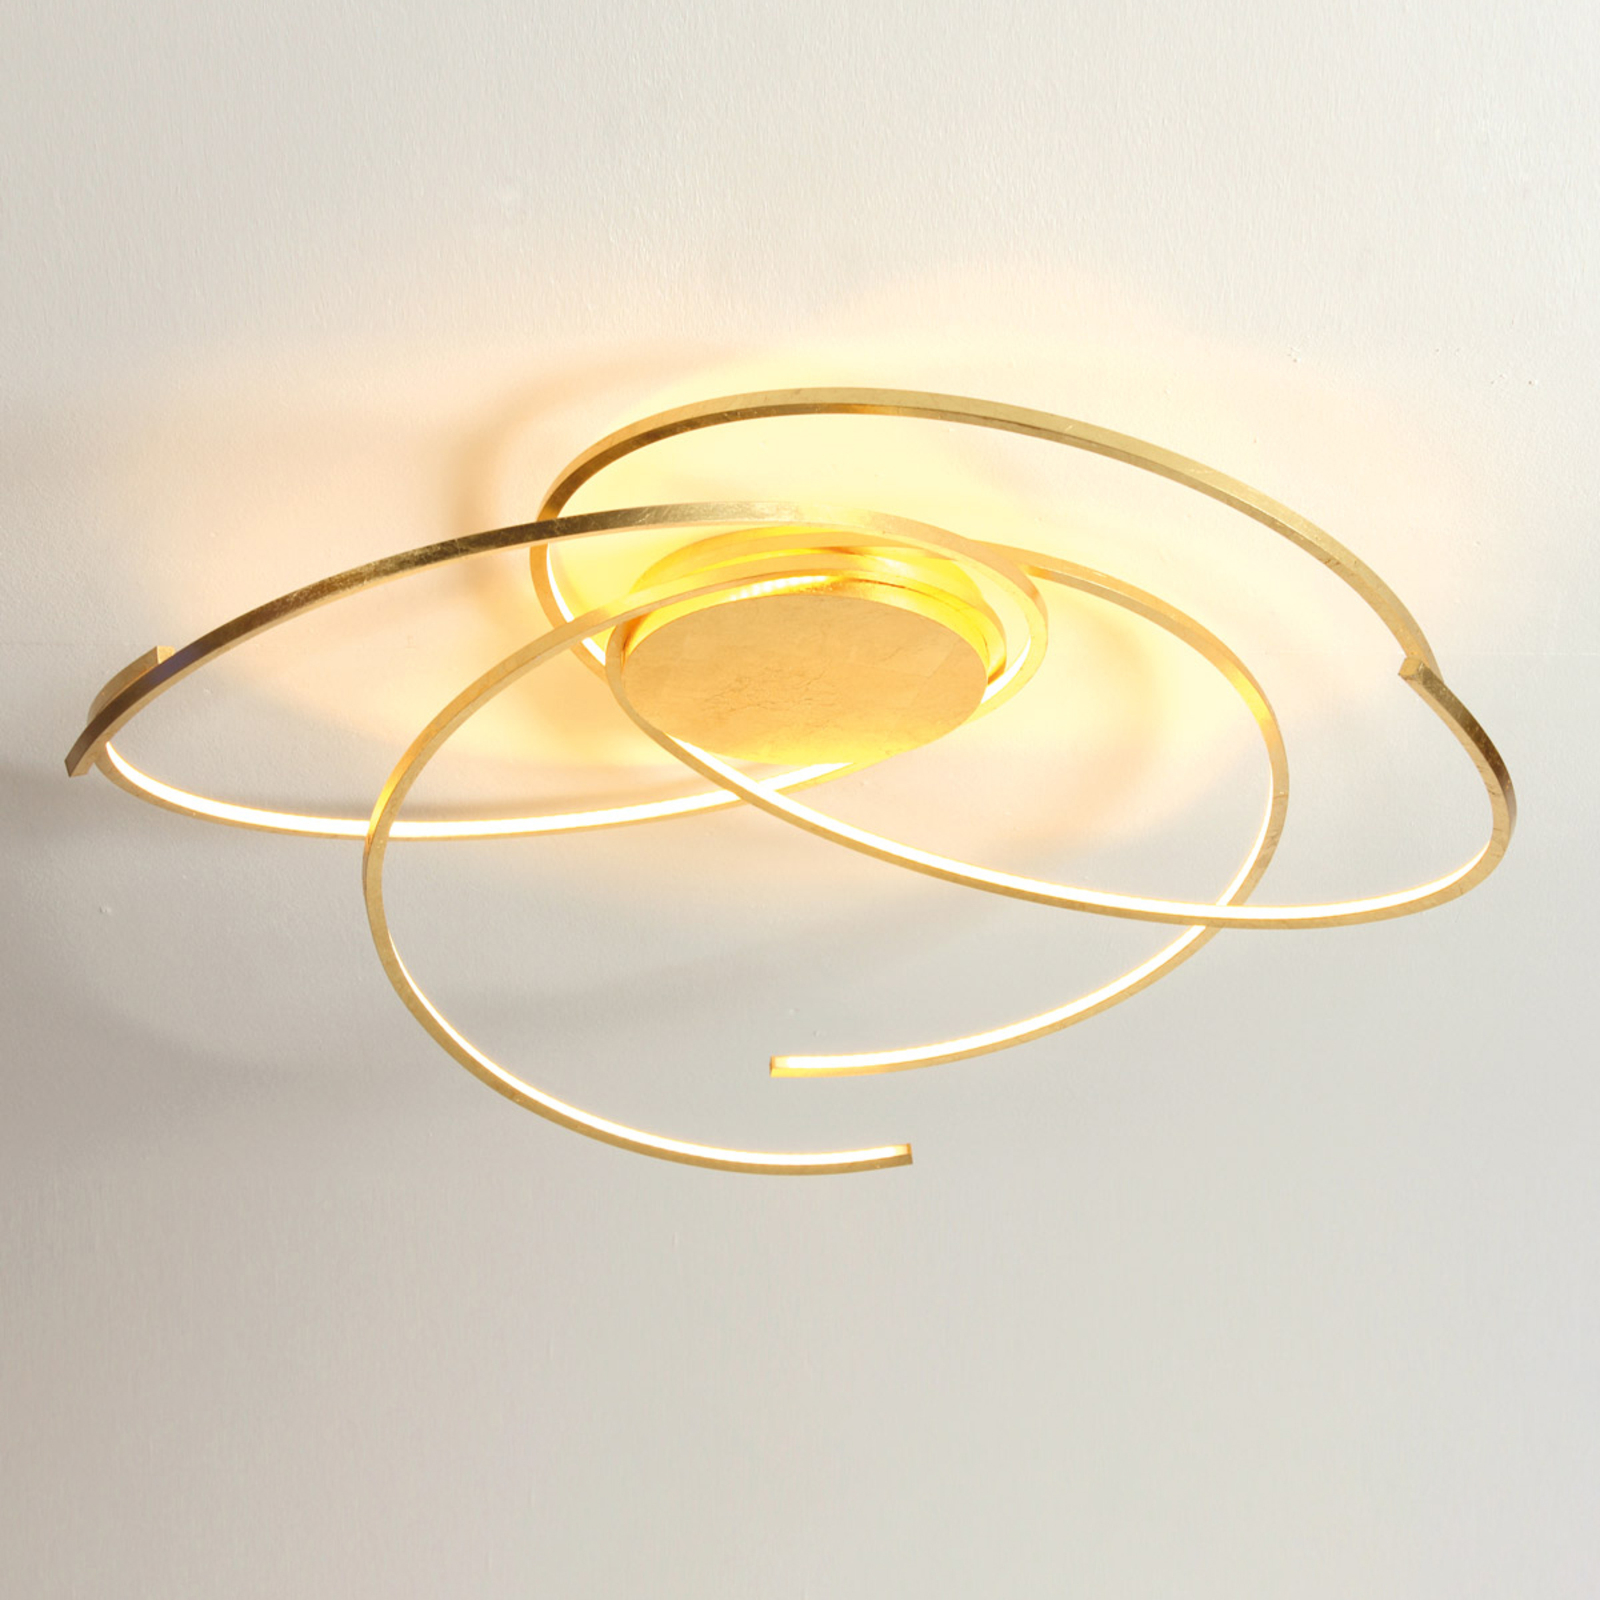 Escale Space - LED-taklampa, 80 cm, bladguld